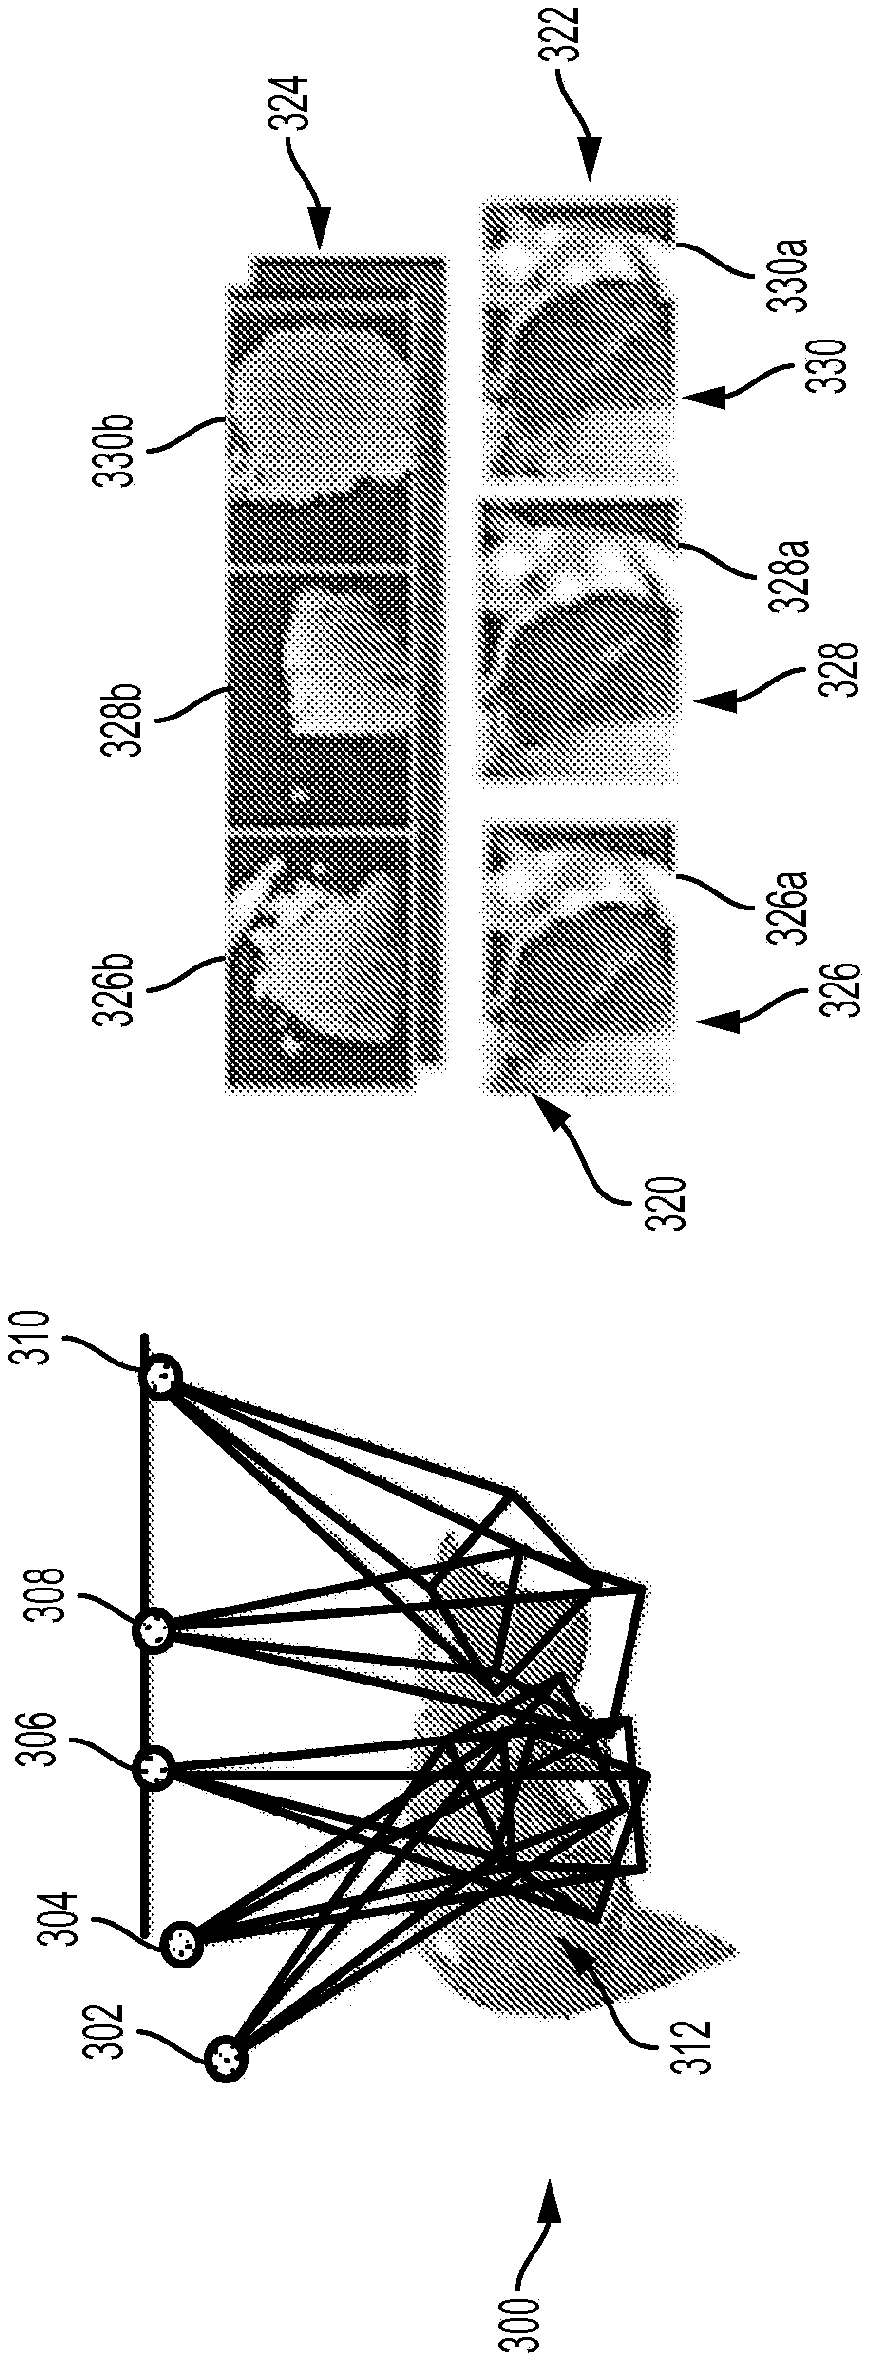 Method and system for semantic segmentation in laparoscopic and endoscopic 2D/2.5D image data